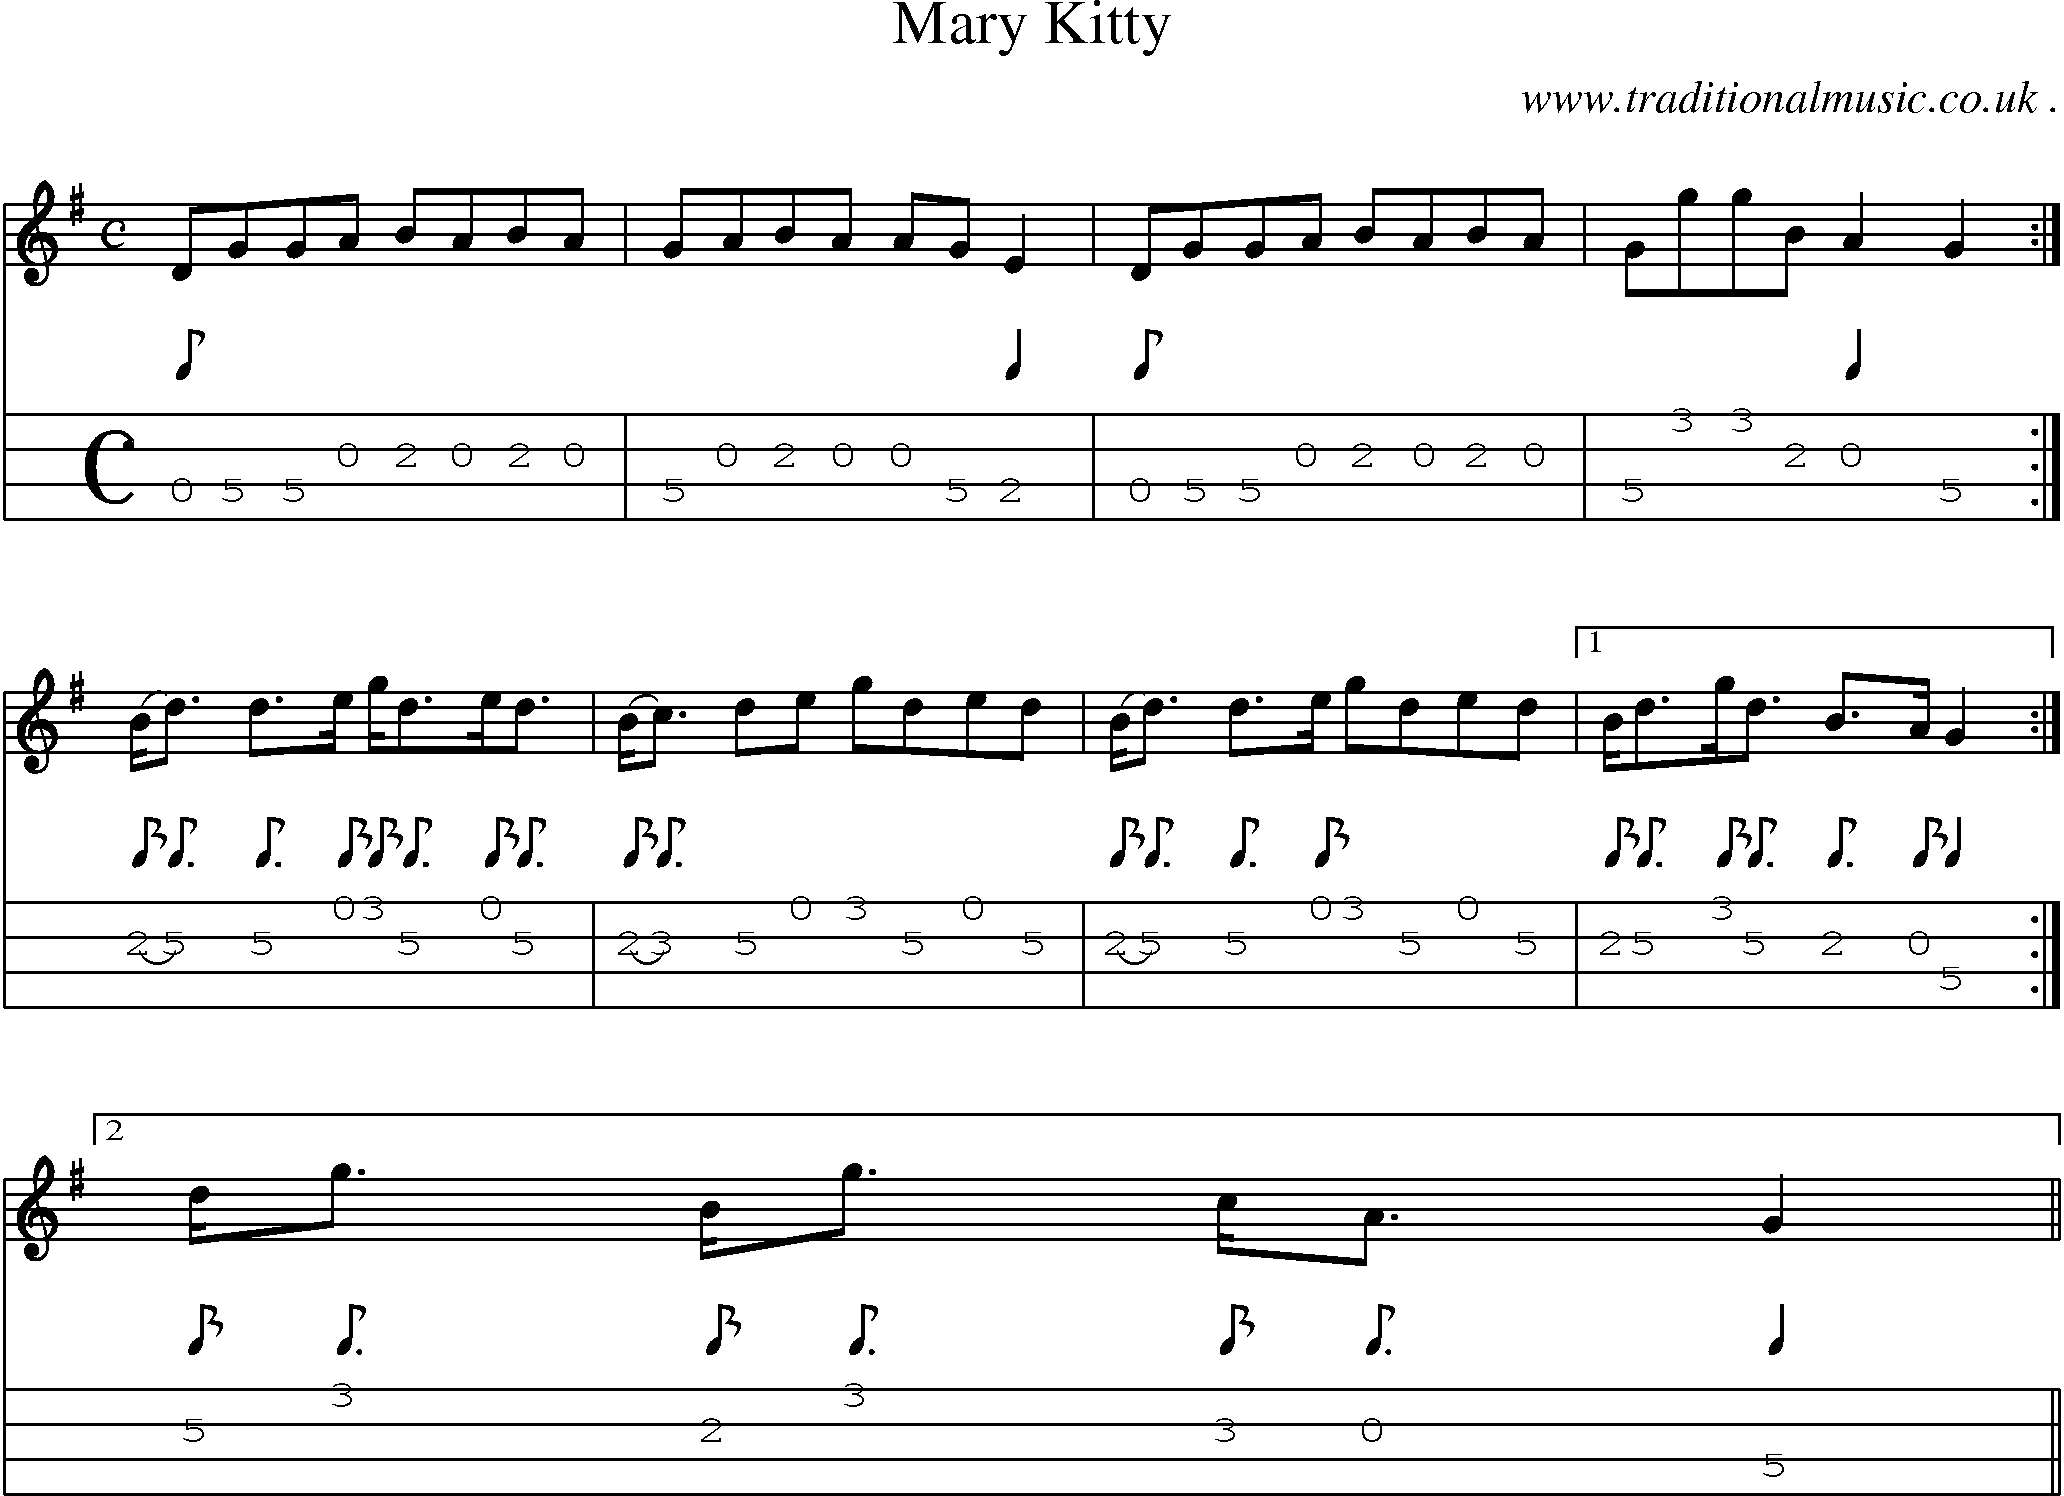 Sheet-music  score, Chords and Mandolin Tabs for Mary Kitty